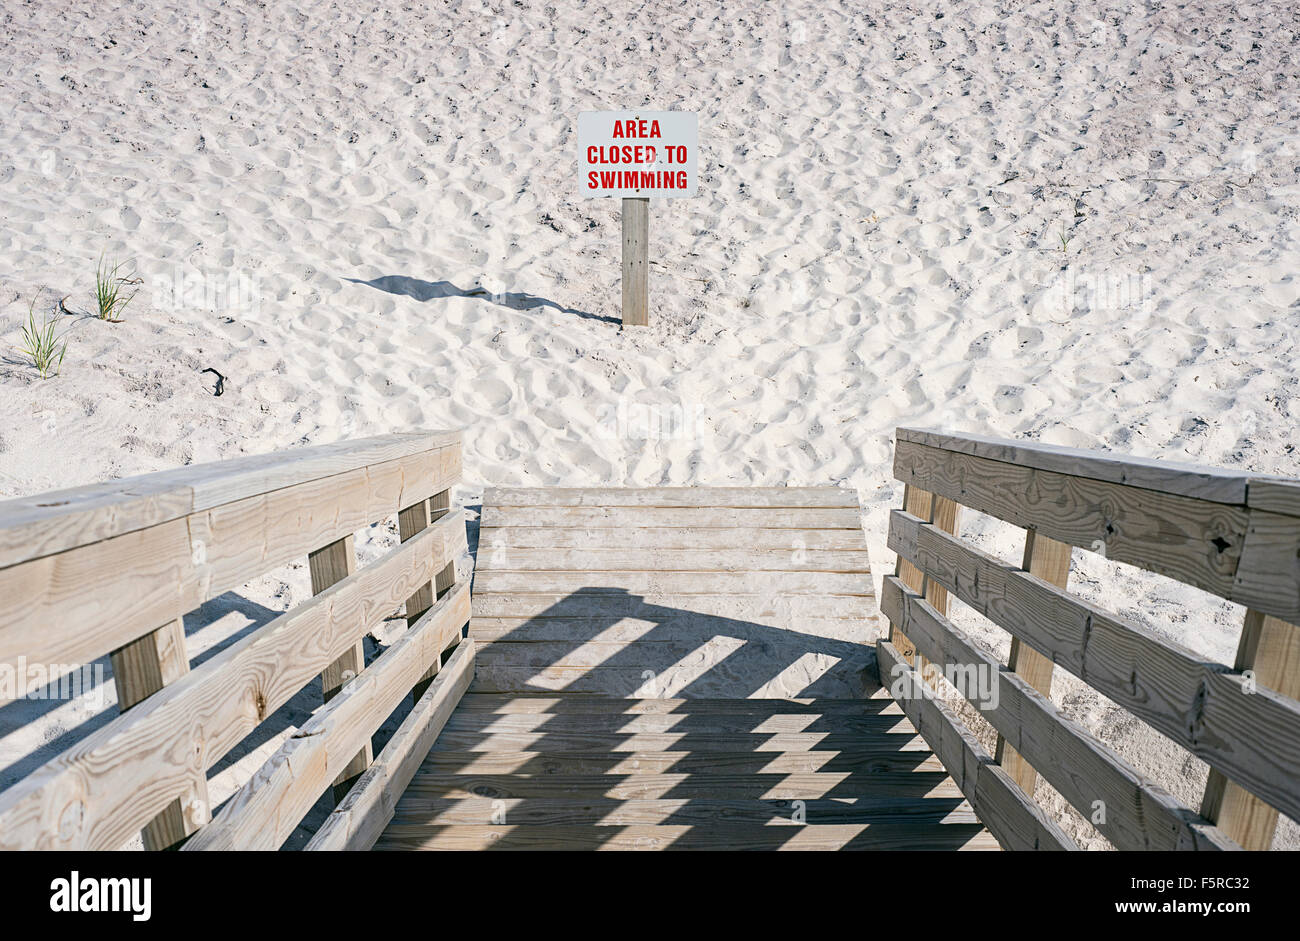 A beach sign on a Fire Island beach designating it closed to swimming. Stock Photo